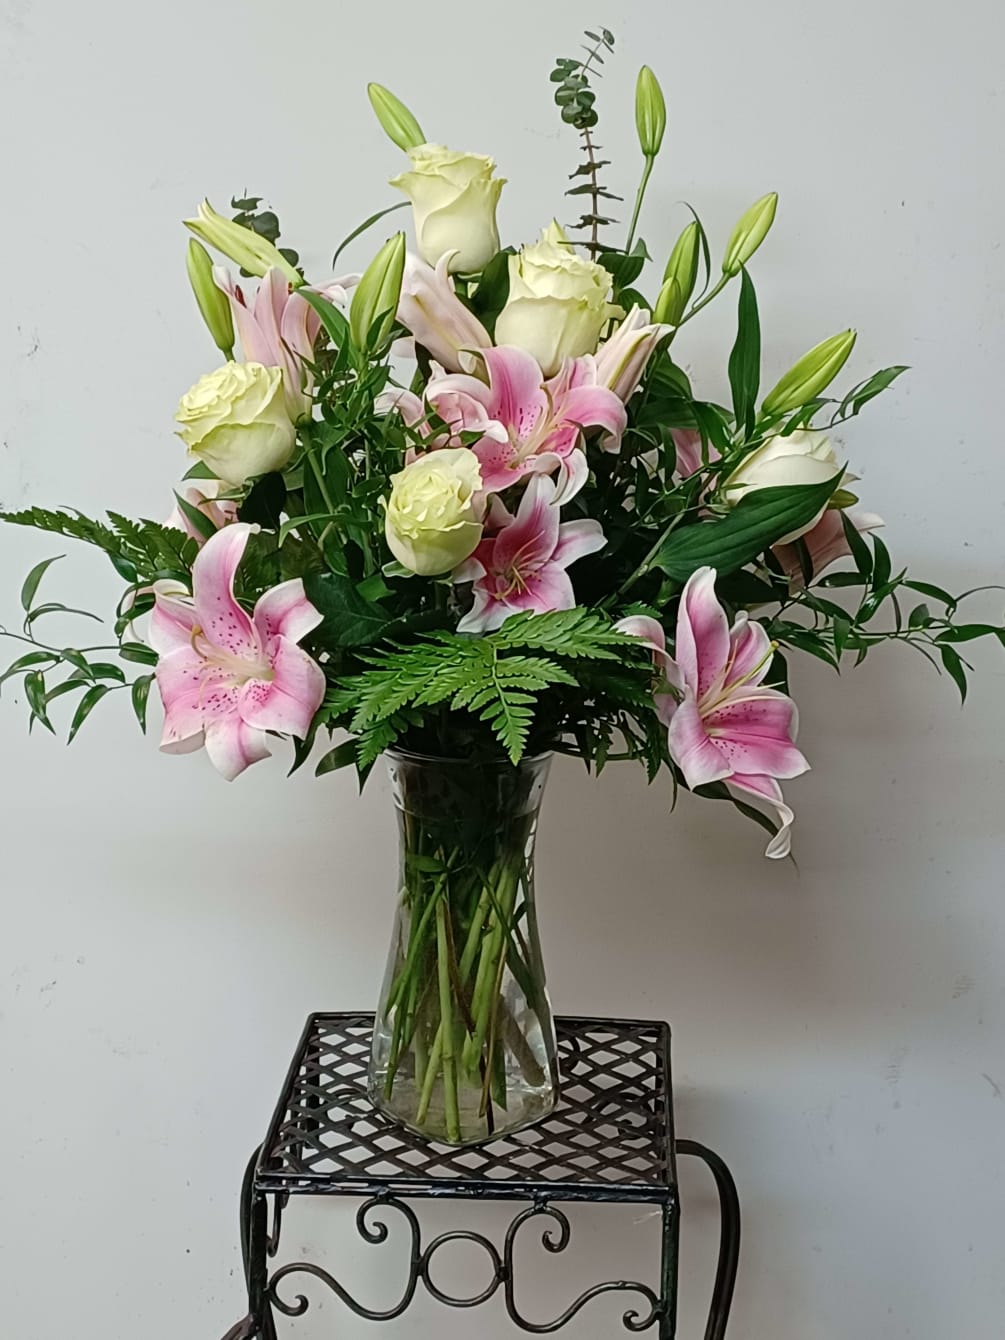 Request  roses, lilies Colors arranged in a vase with greens